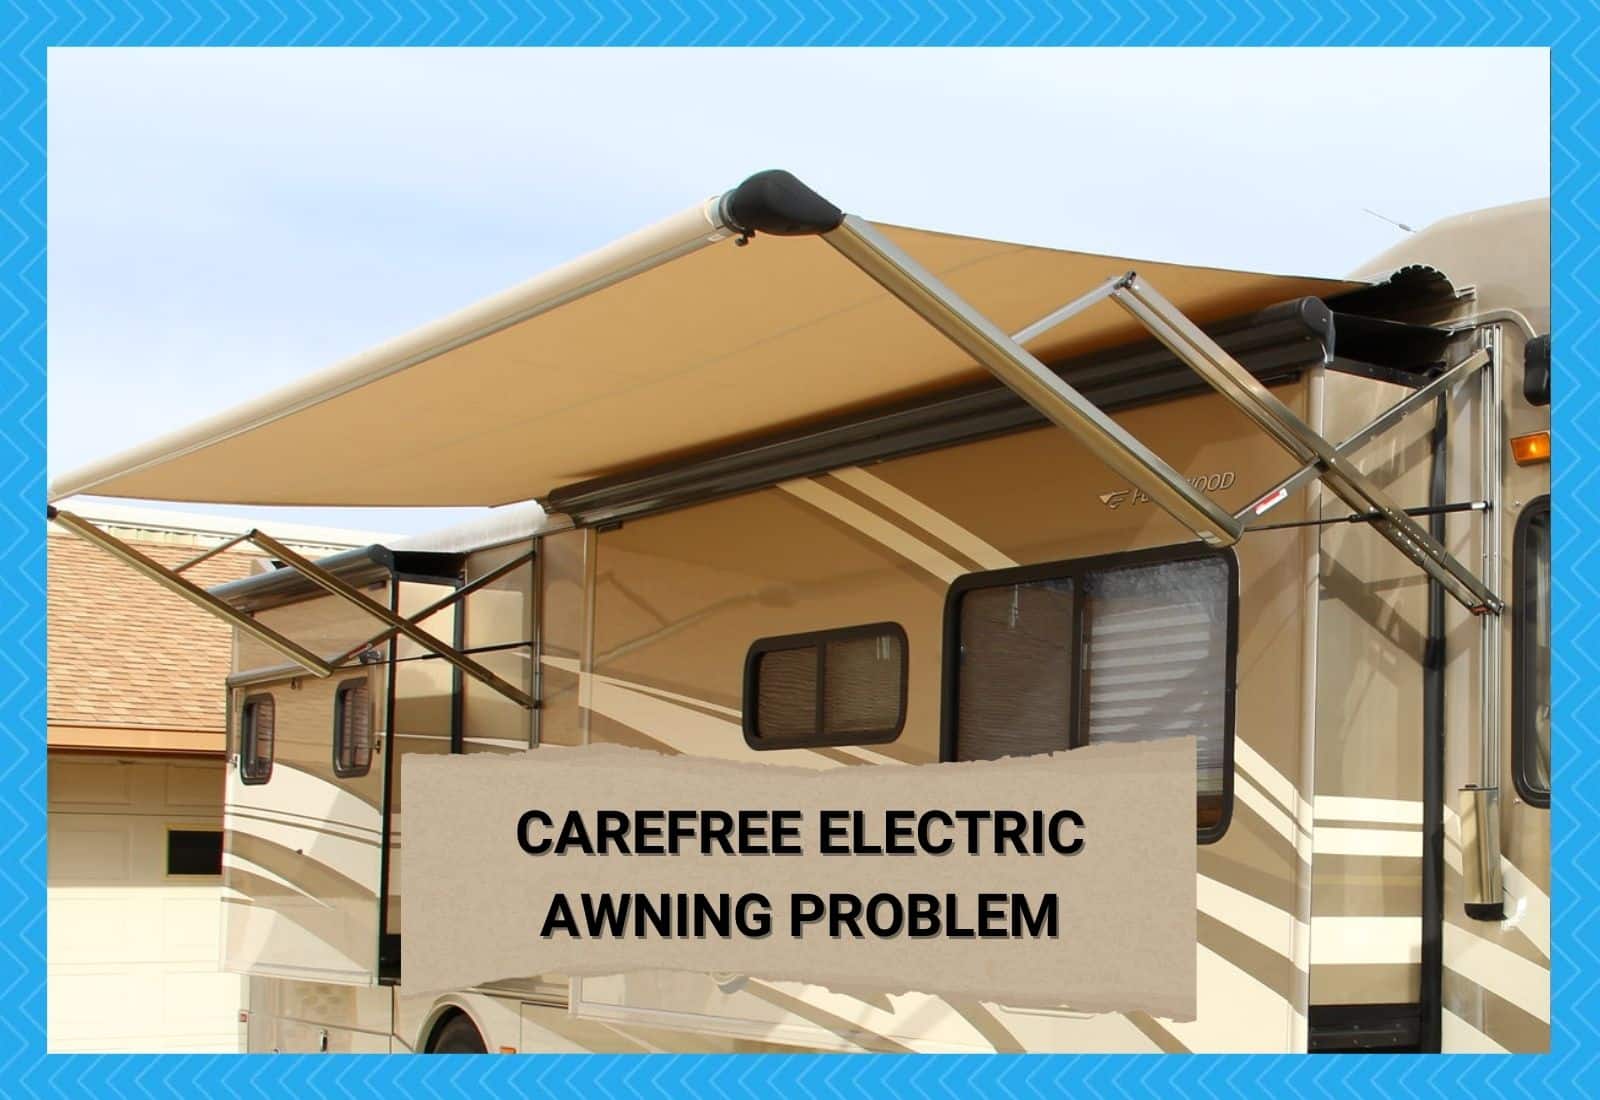 Carefree Electric Awning Problem